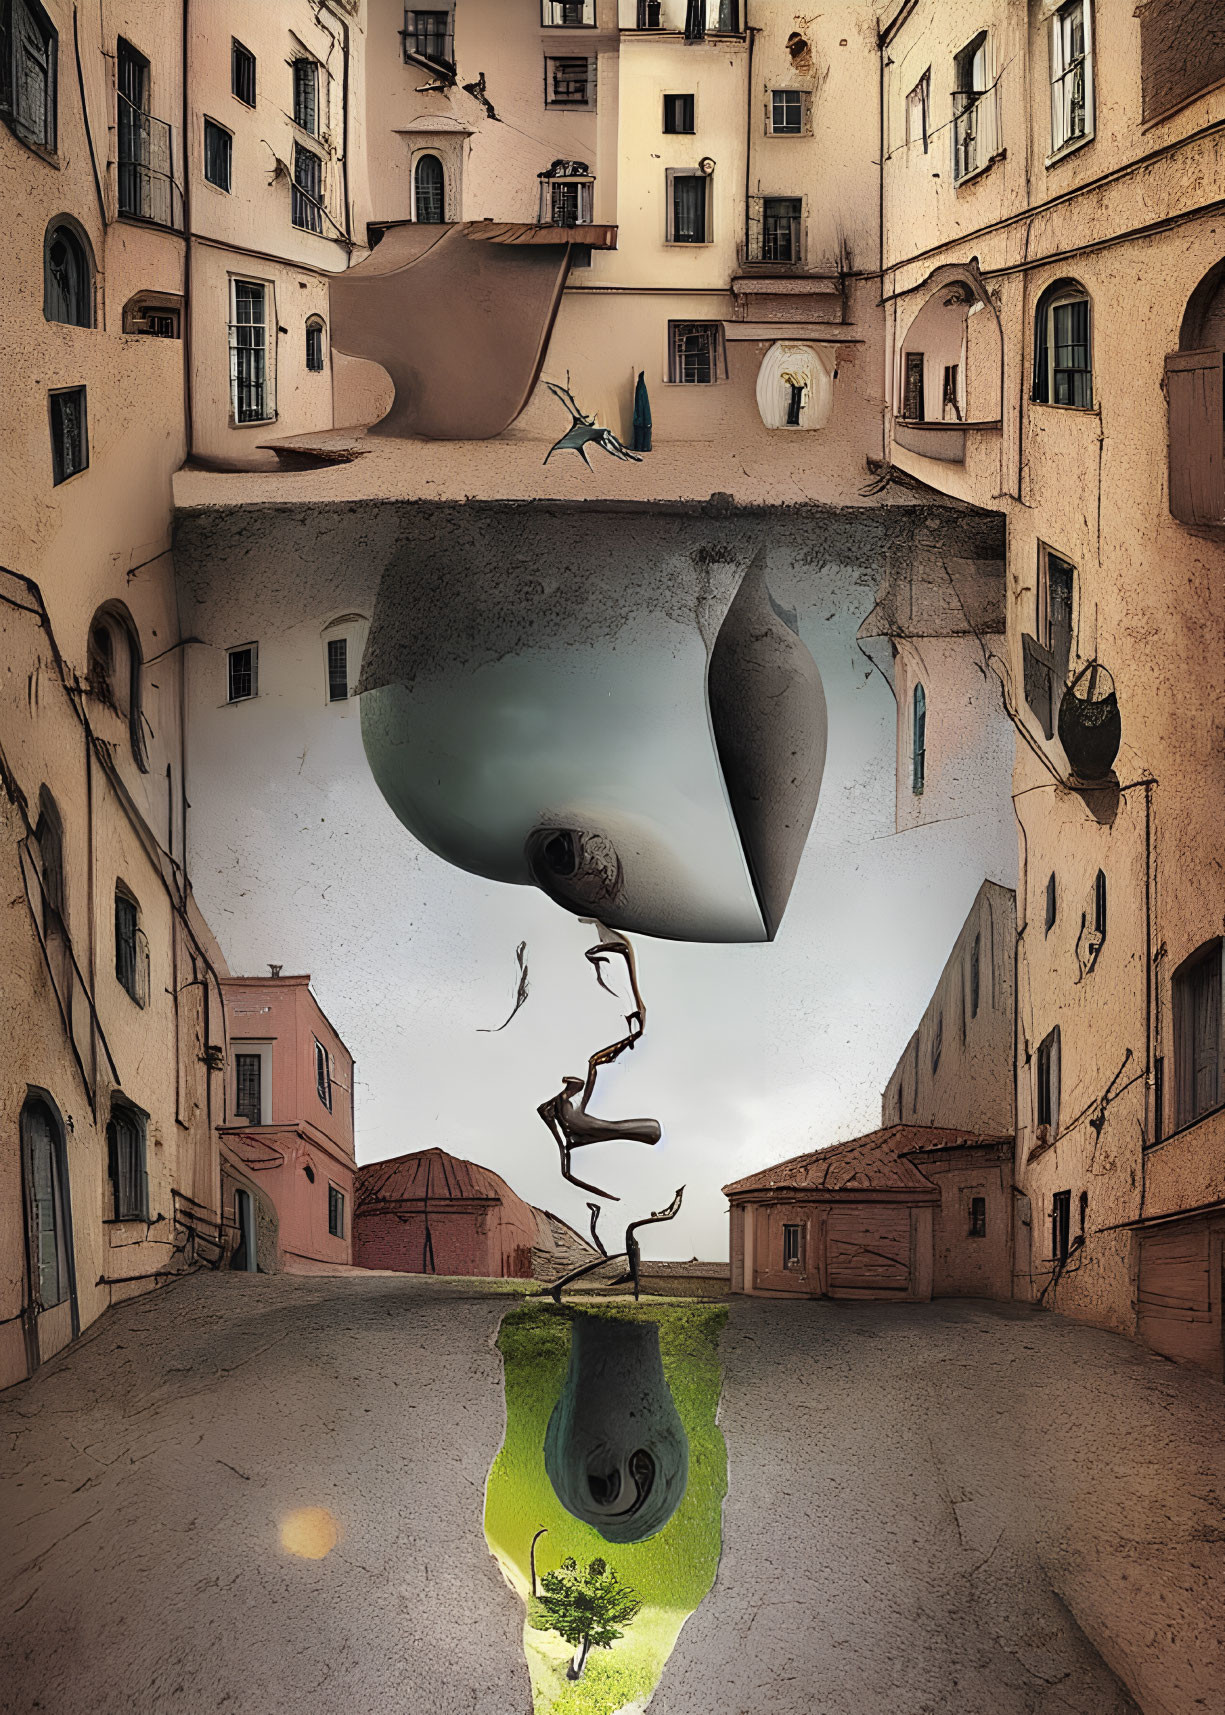 Surreal image of inverted town with distorted reflection and person on twisted path